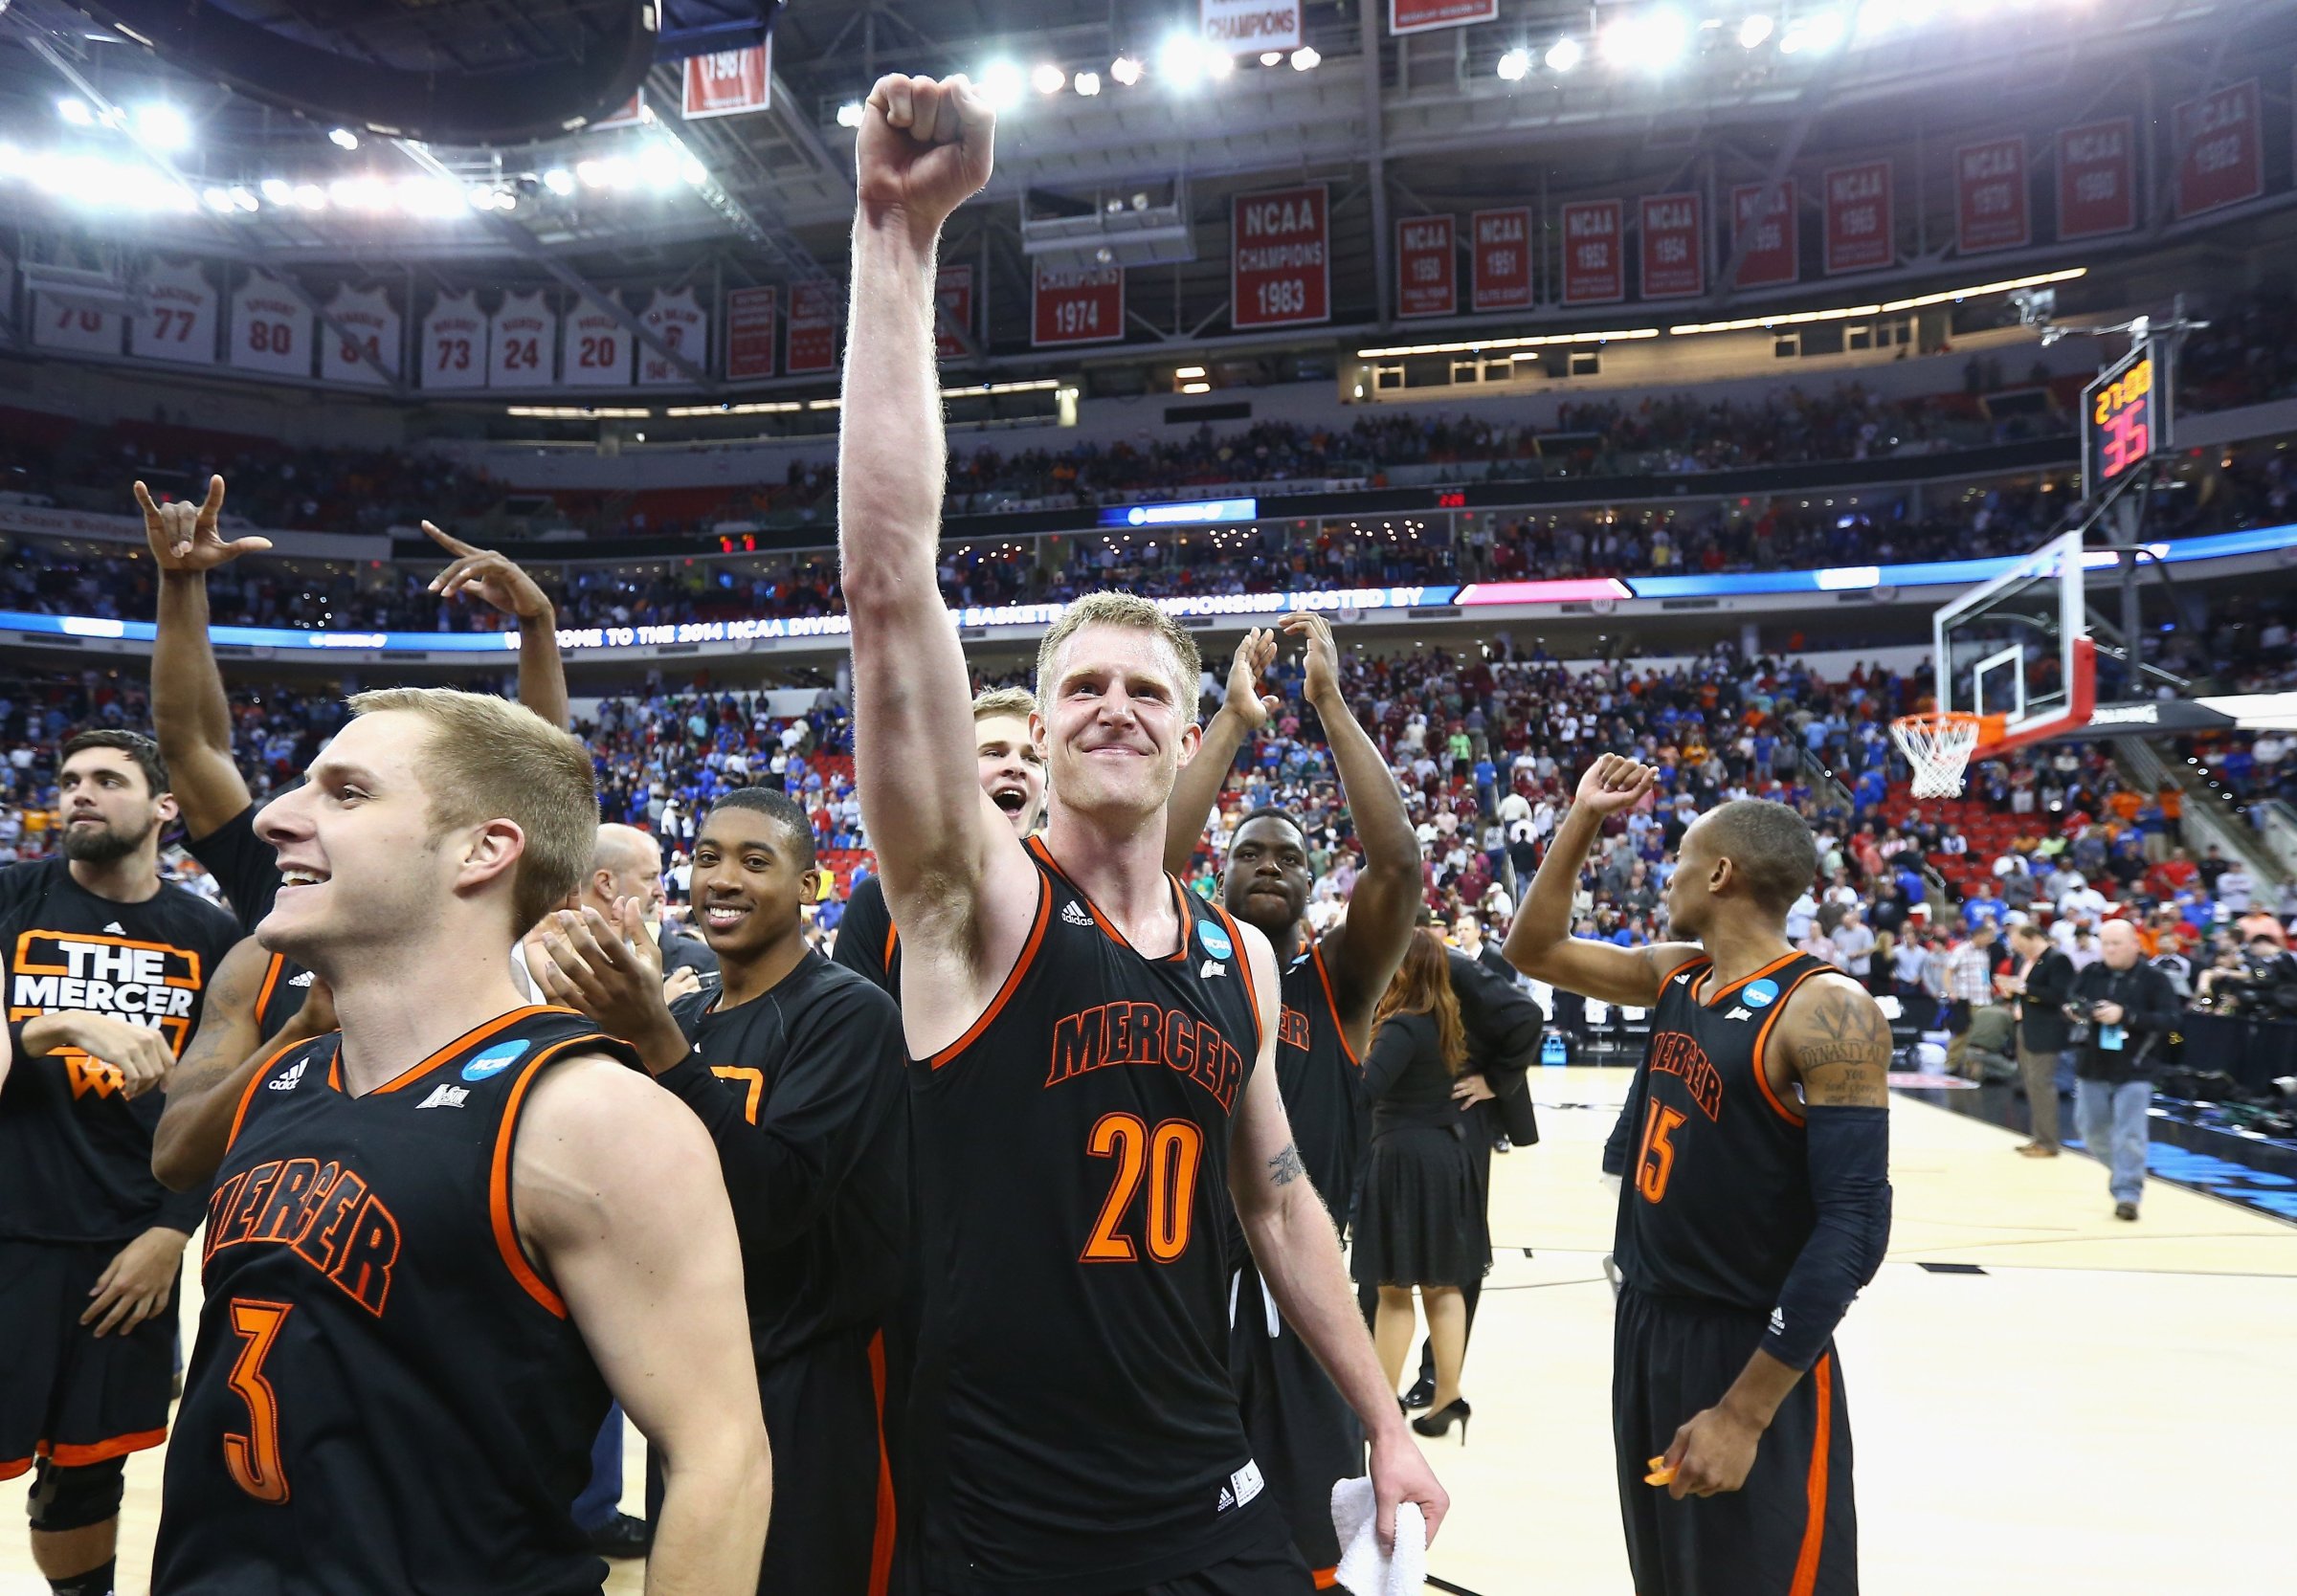 Jakob Gollon of the Mercer Bears celebrates with teammates after defeating the Duke Blue Devils 78-71